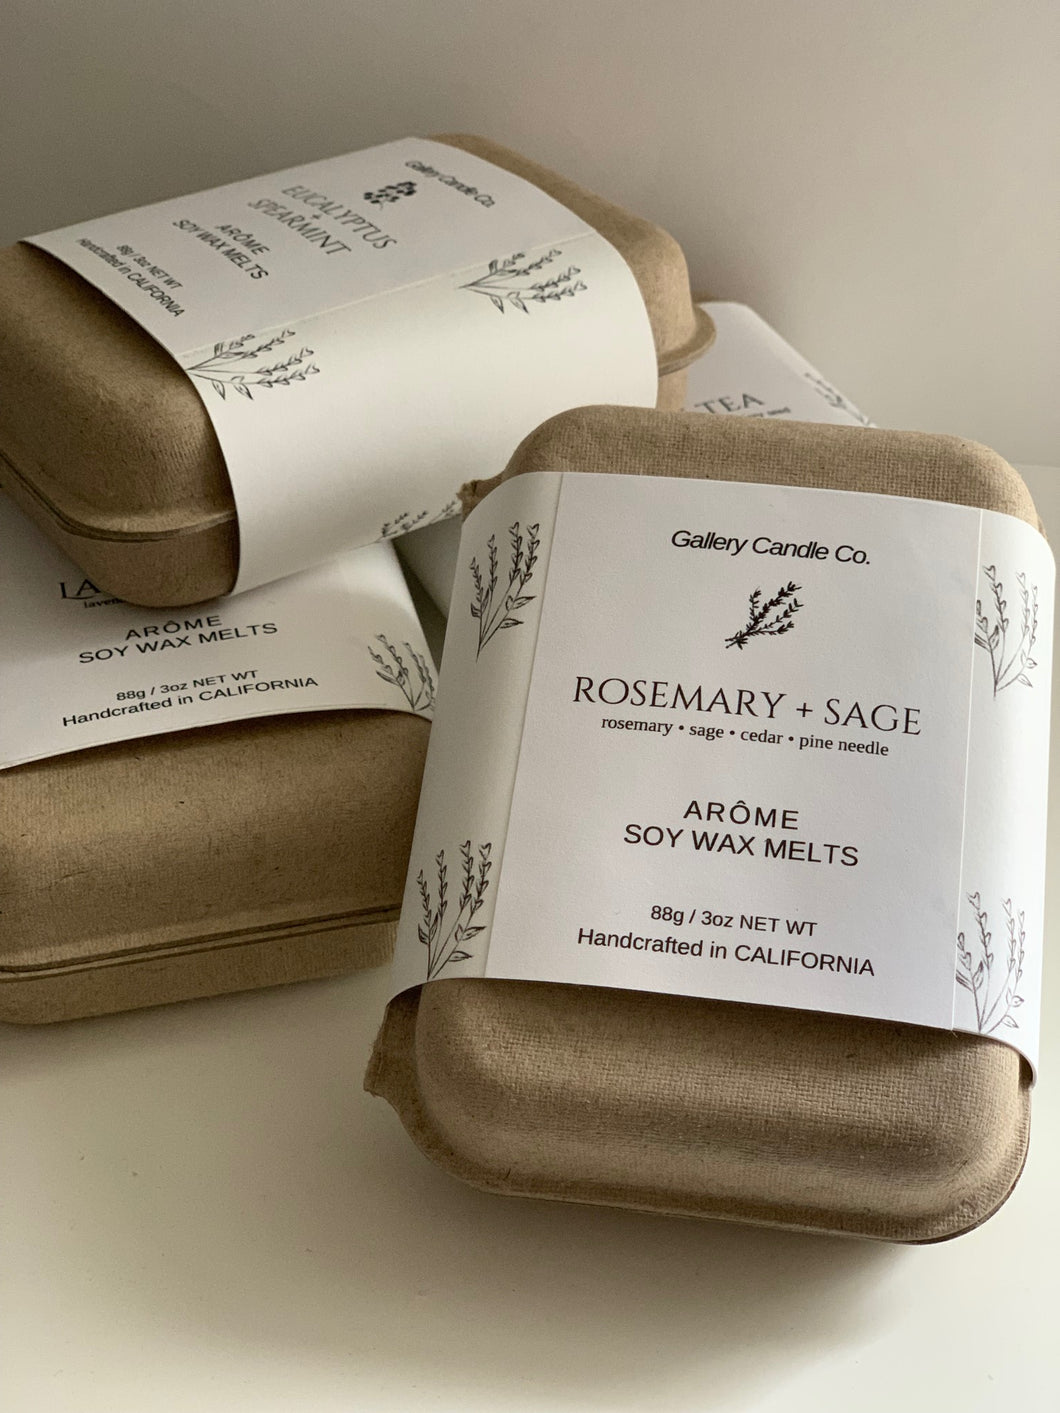 ROSEMARY SAGE HERBAL ARÔME WAX MELTS – Gallery Candle Co